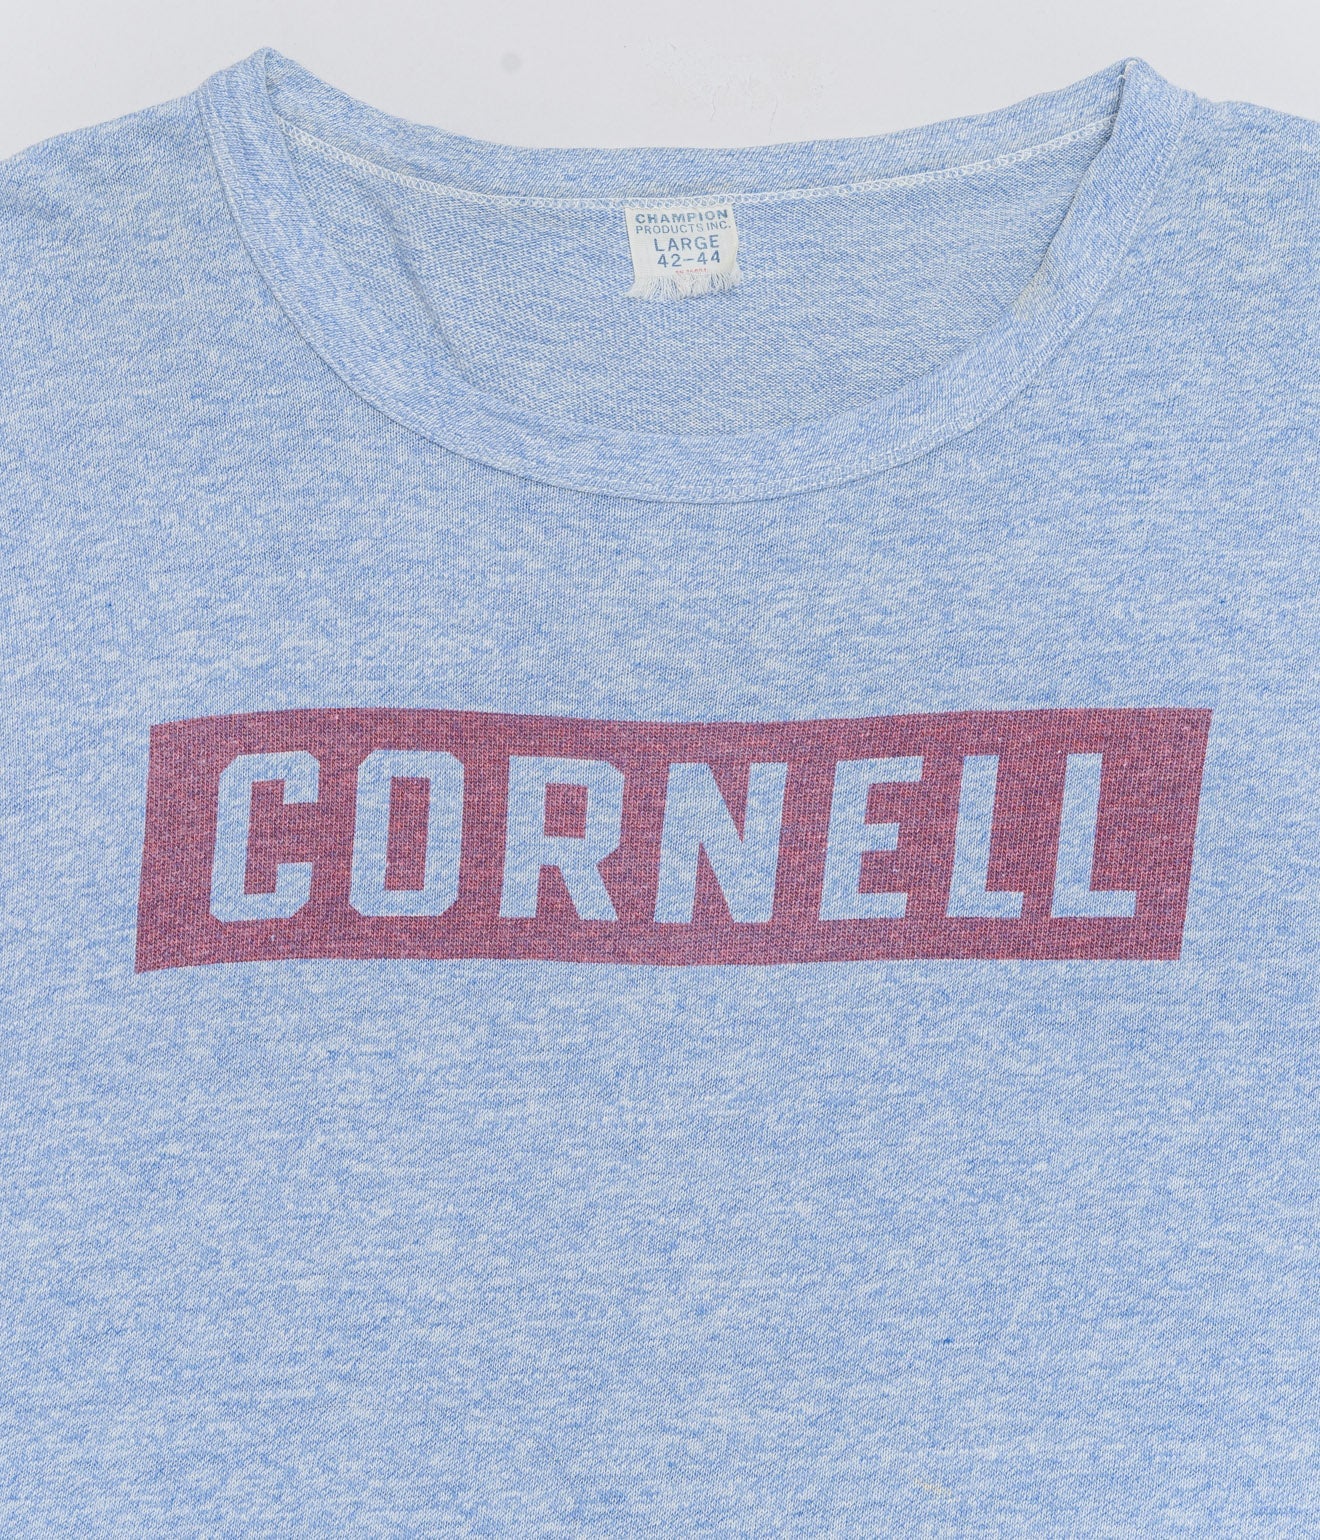 60's Champion PRODUCTS TAG "CORNELL" T-SHIRT - WEAREALLANIMALS